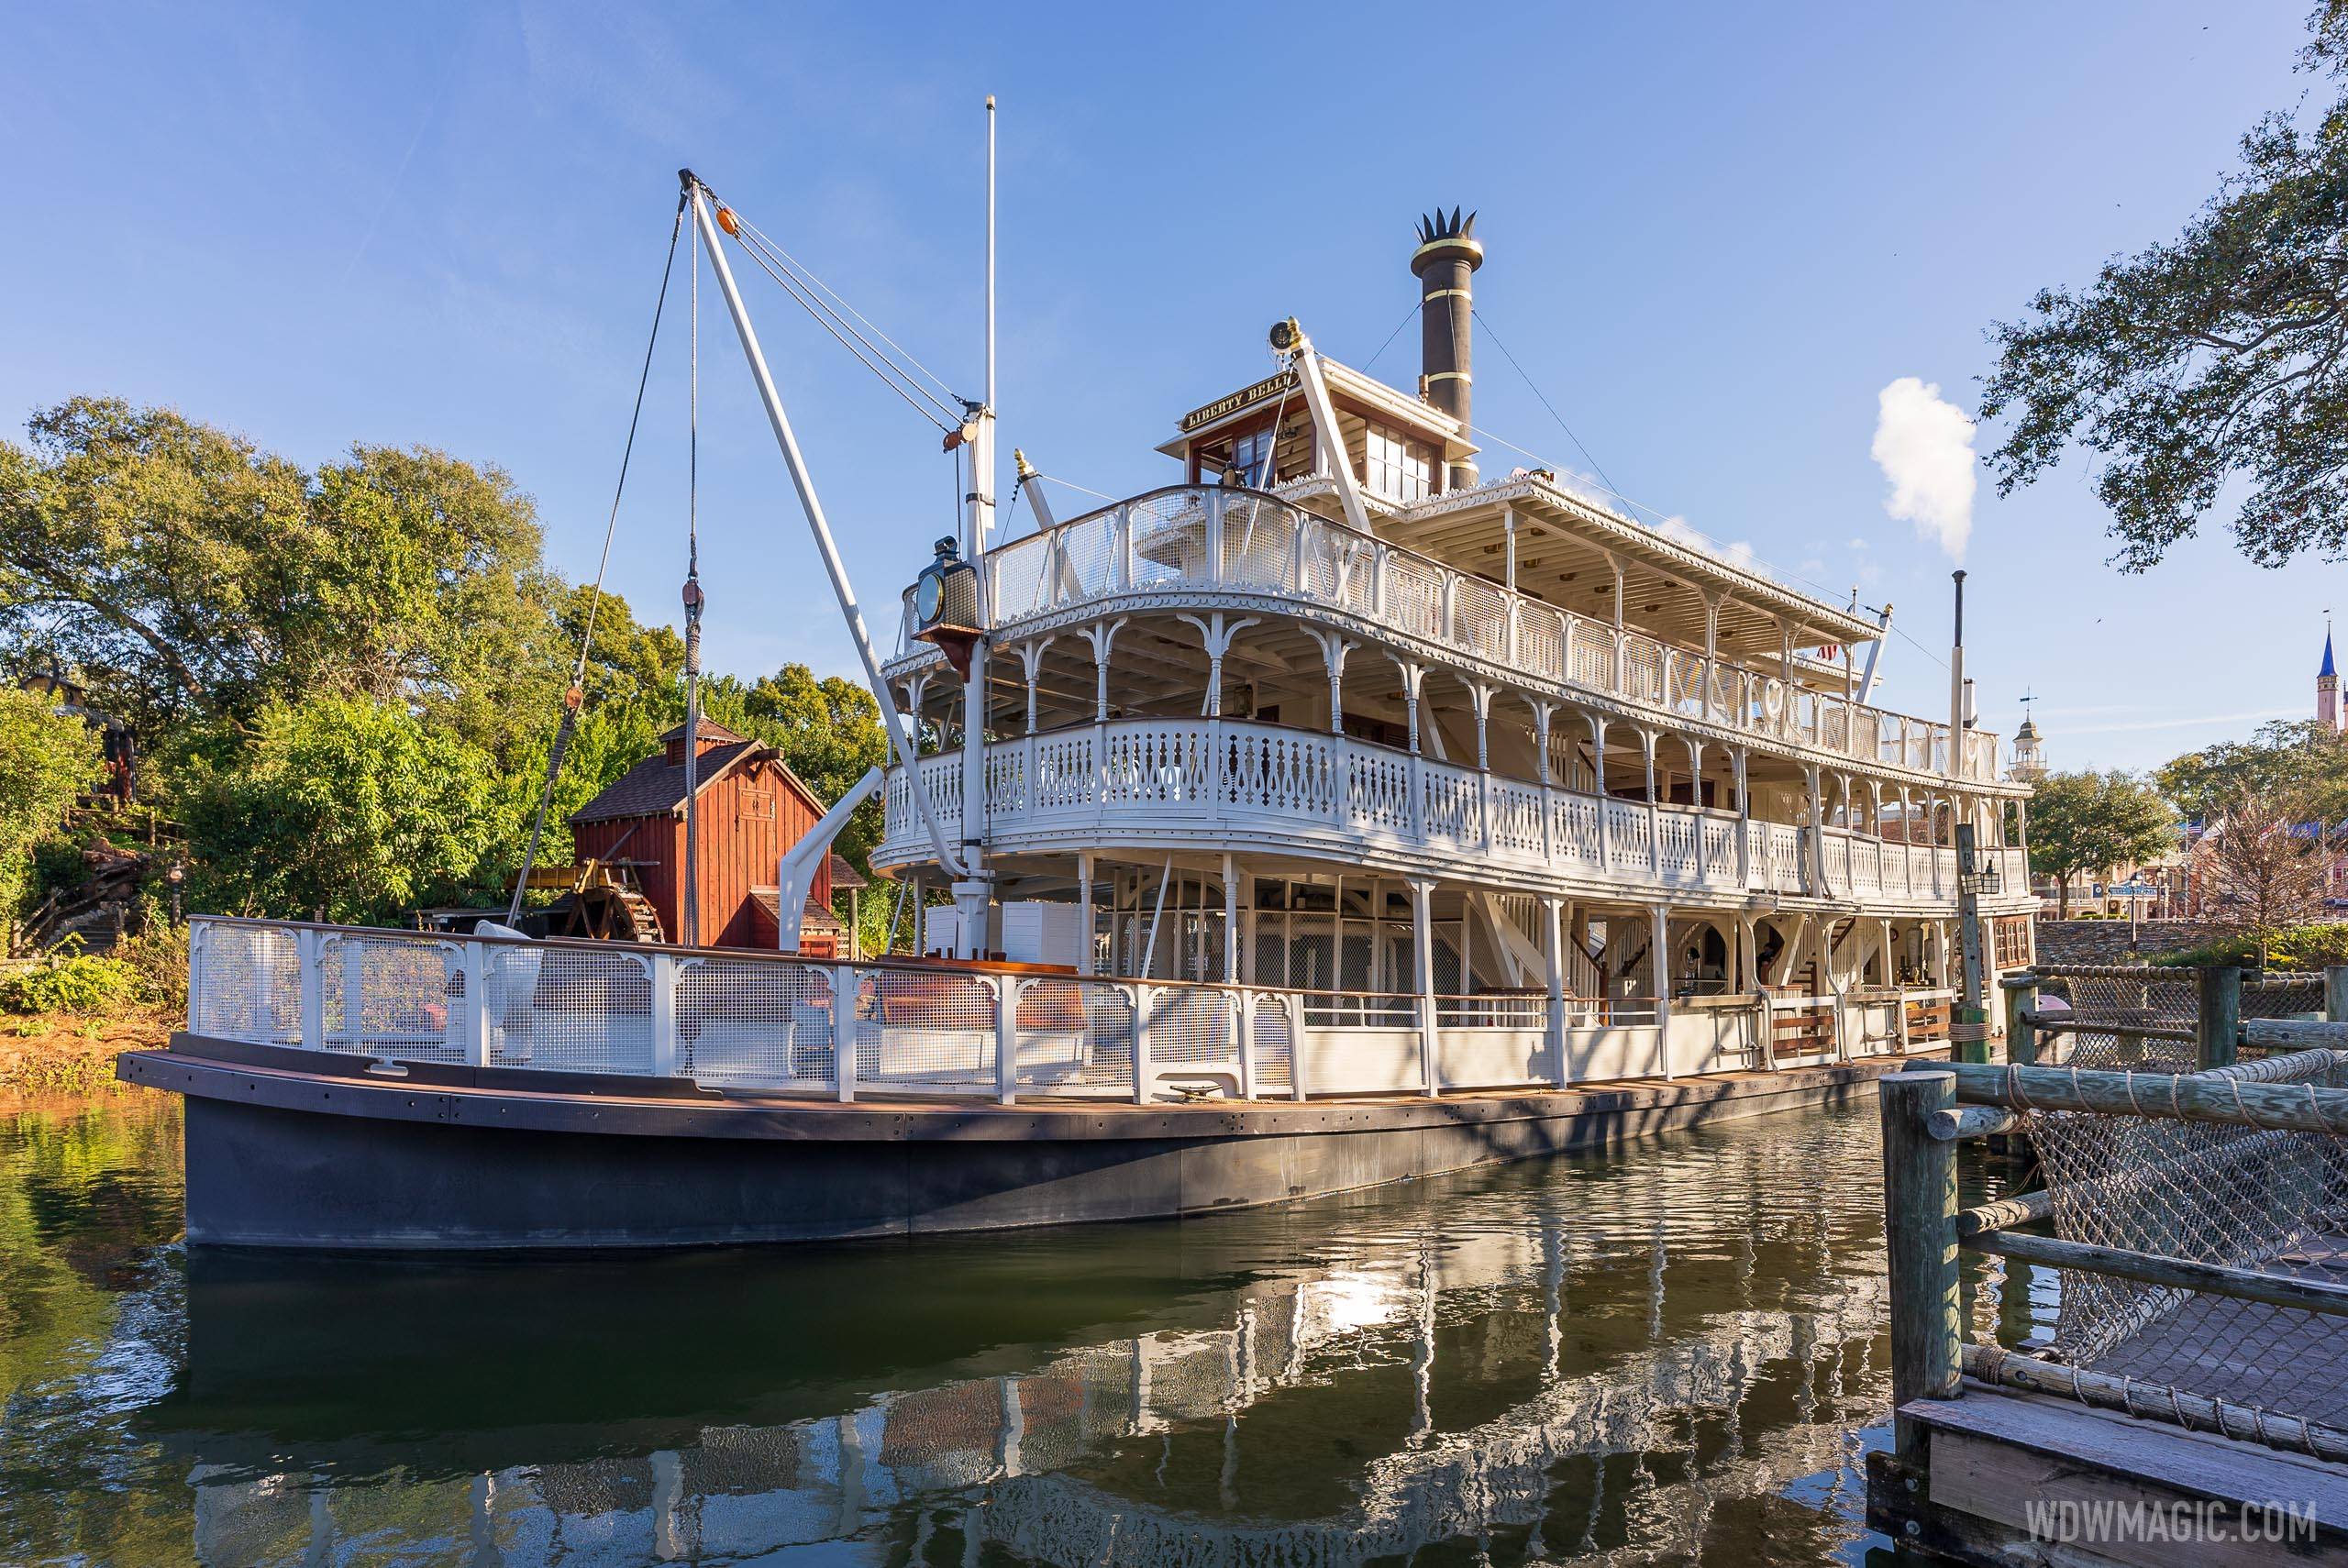 Short refurbishment scheduled for the Liberty Square Riverboat in January 2016